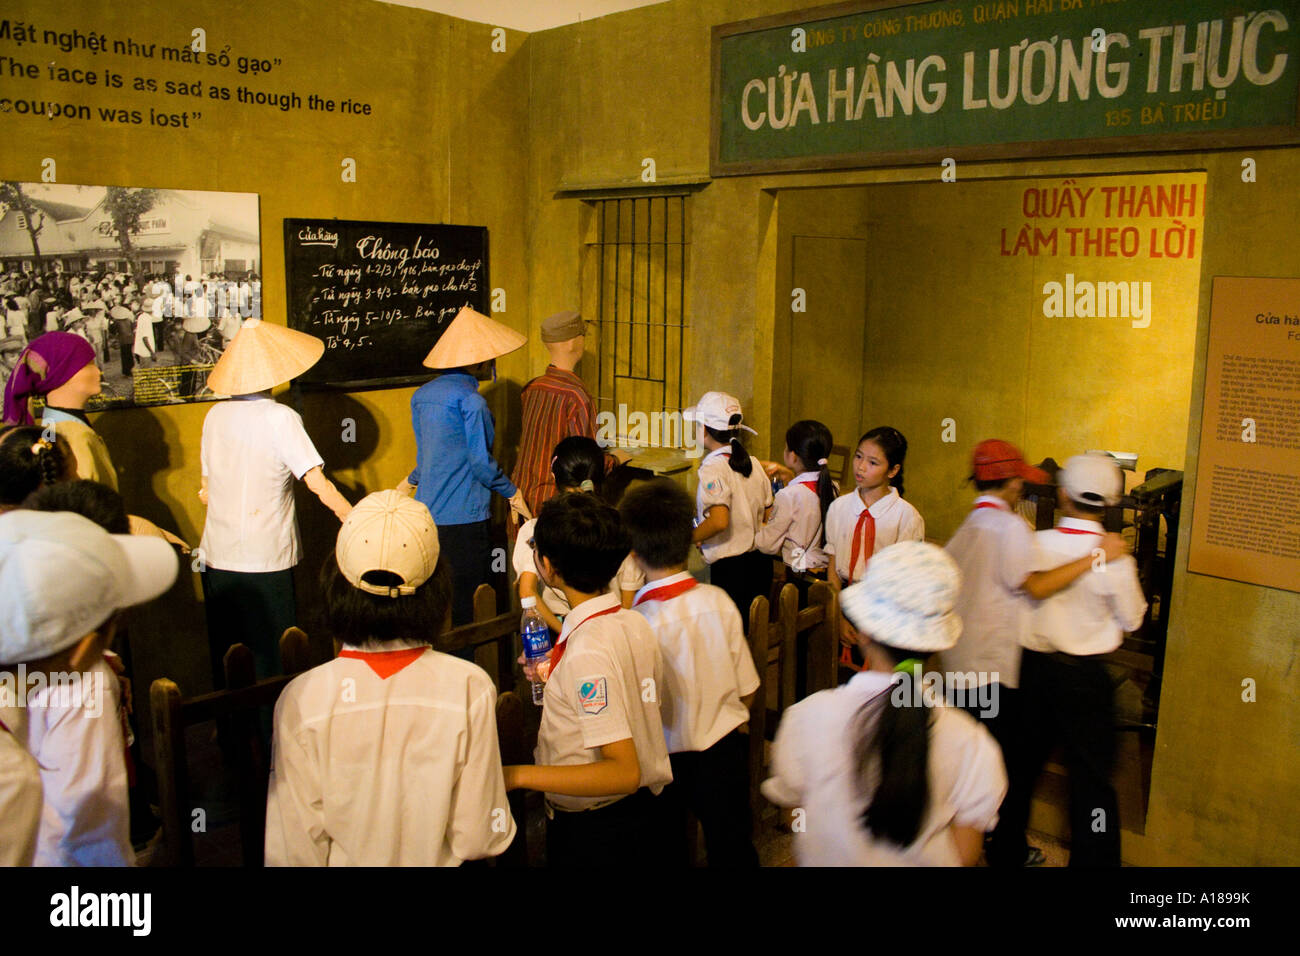 2007 Photograph Image Uniformed School Children Walk through a Display on Ration Card Lines in Early Communism Days of Vietnam Stock Photo